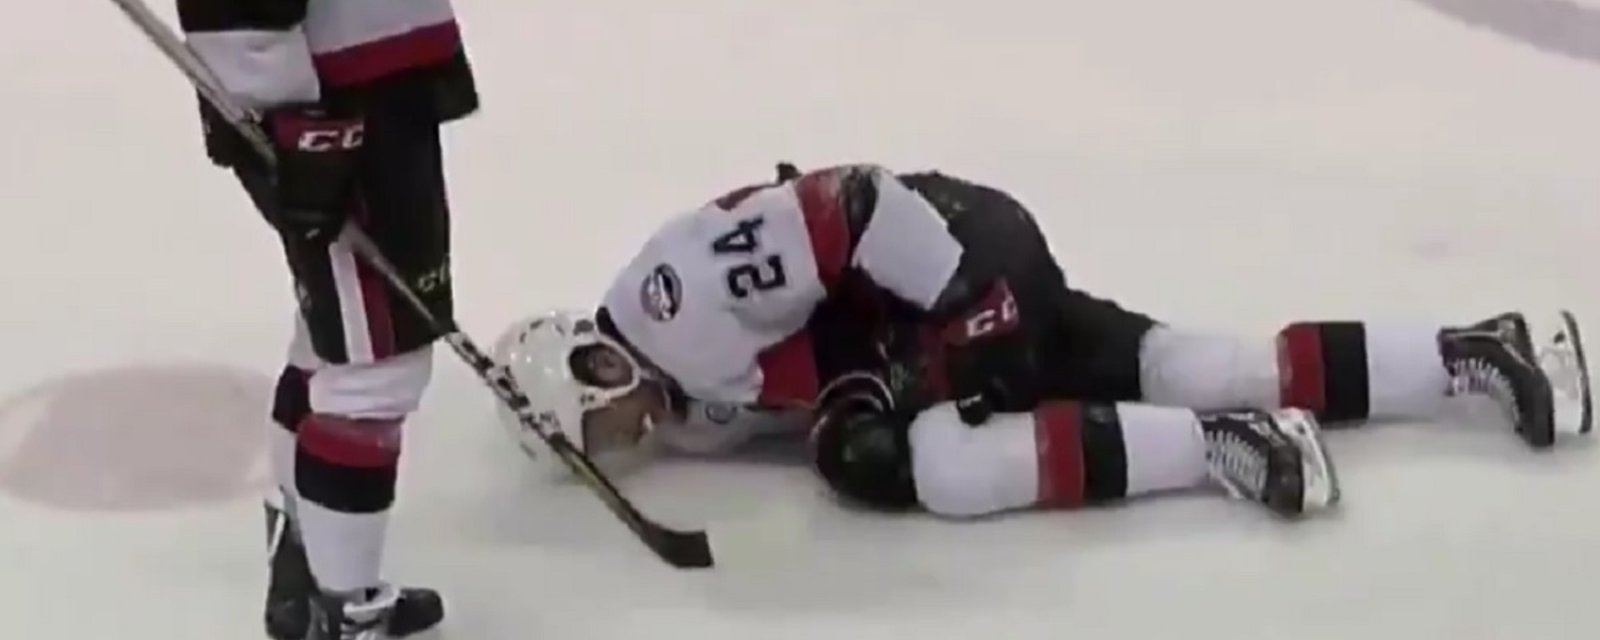 NHL prospect gets absolutely destroyed by violent hit.